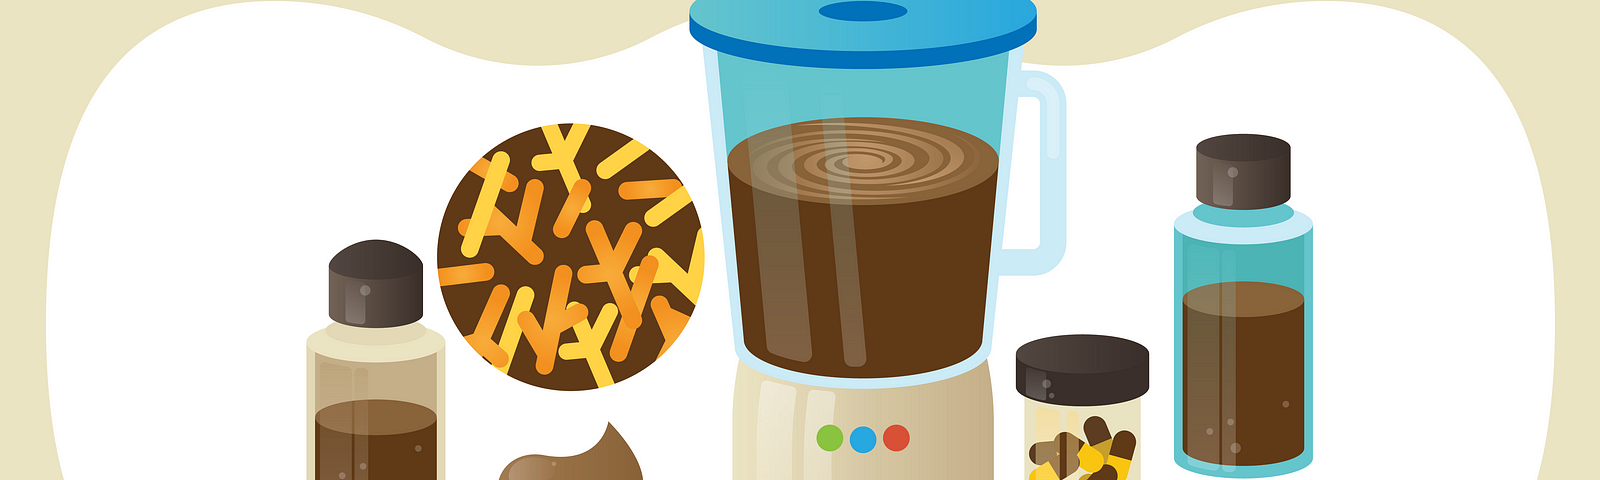 Illustration shows blender with brown material alongside vials of brown liquid and pills, and a petri dish holding poop.